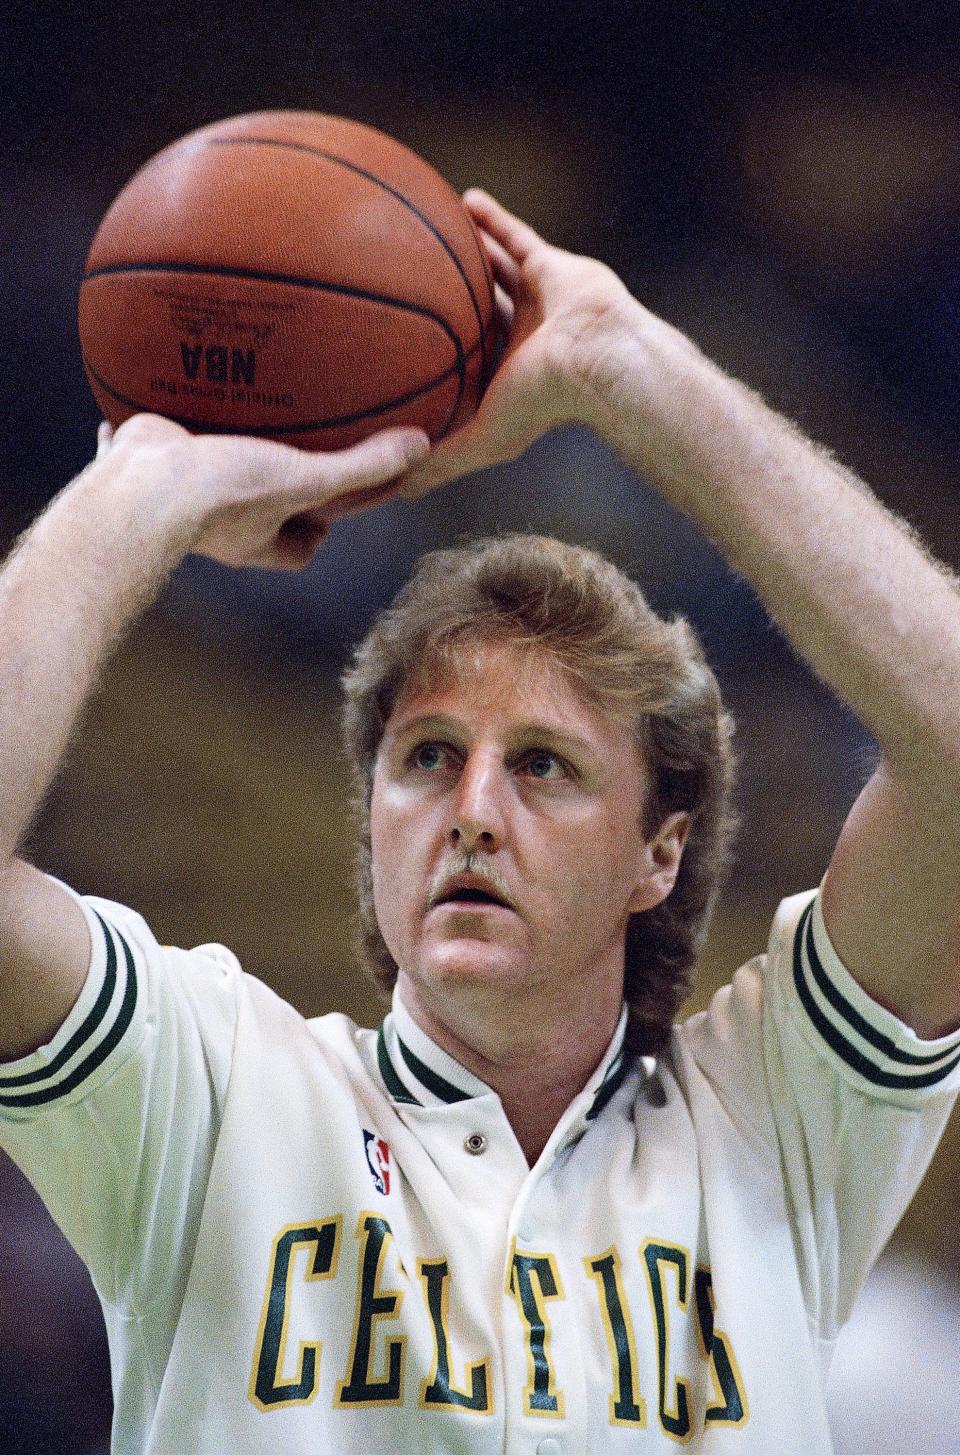 Larry Bird of the Boston Celtics, in Boston at night, Wednesday, Jan. 15, 1987 during warm-ups prior to NBA game against Dallas, was named on Thursday as The Associated Press Male Athlete of the Year. (AP Photo/Paul Benoit)